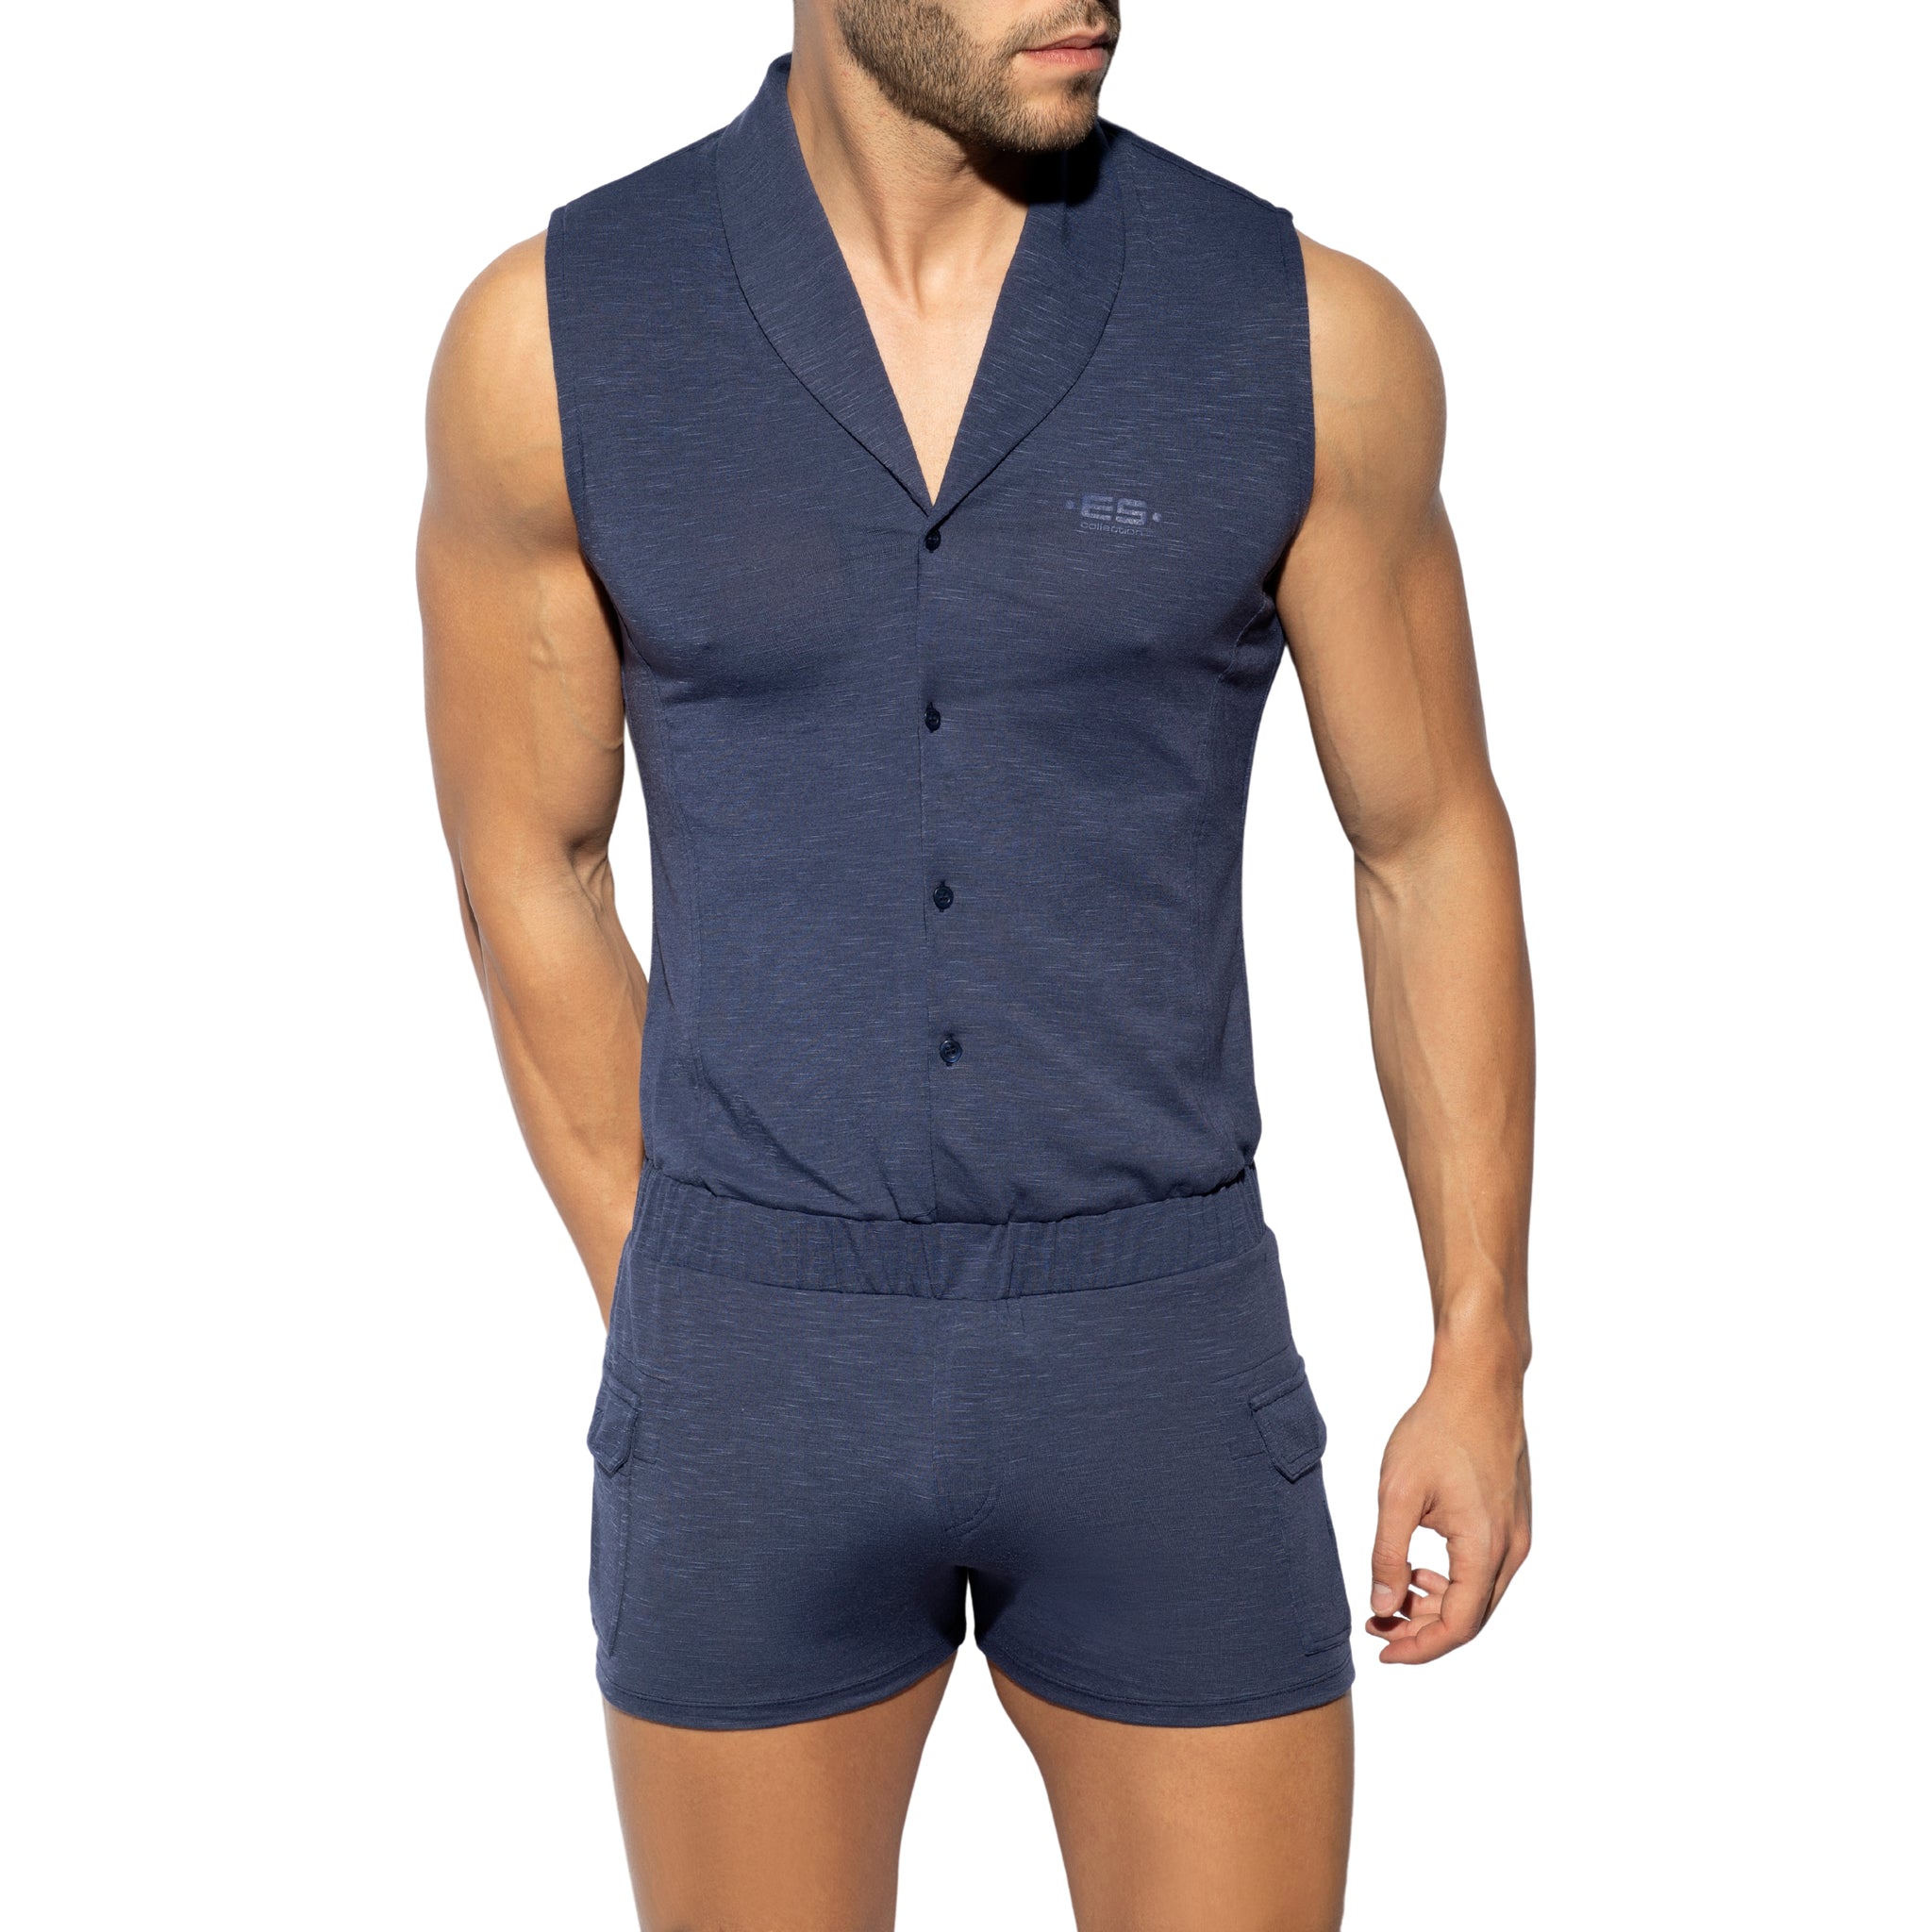 ES Collection Sleeveless Body Suit Navy SP257